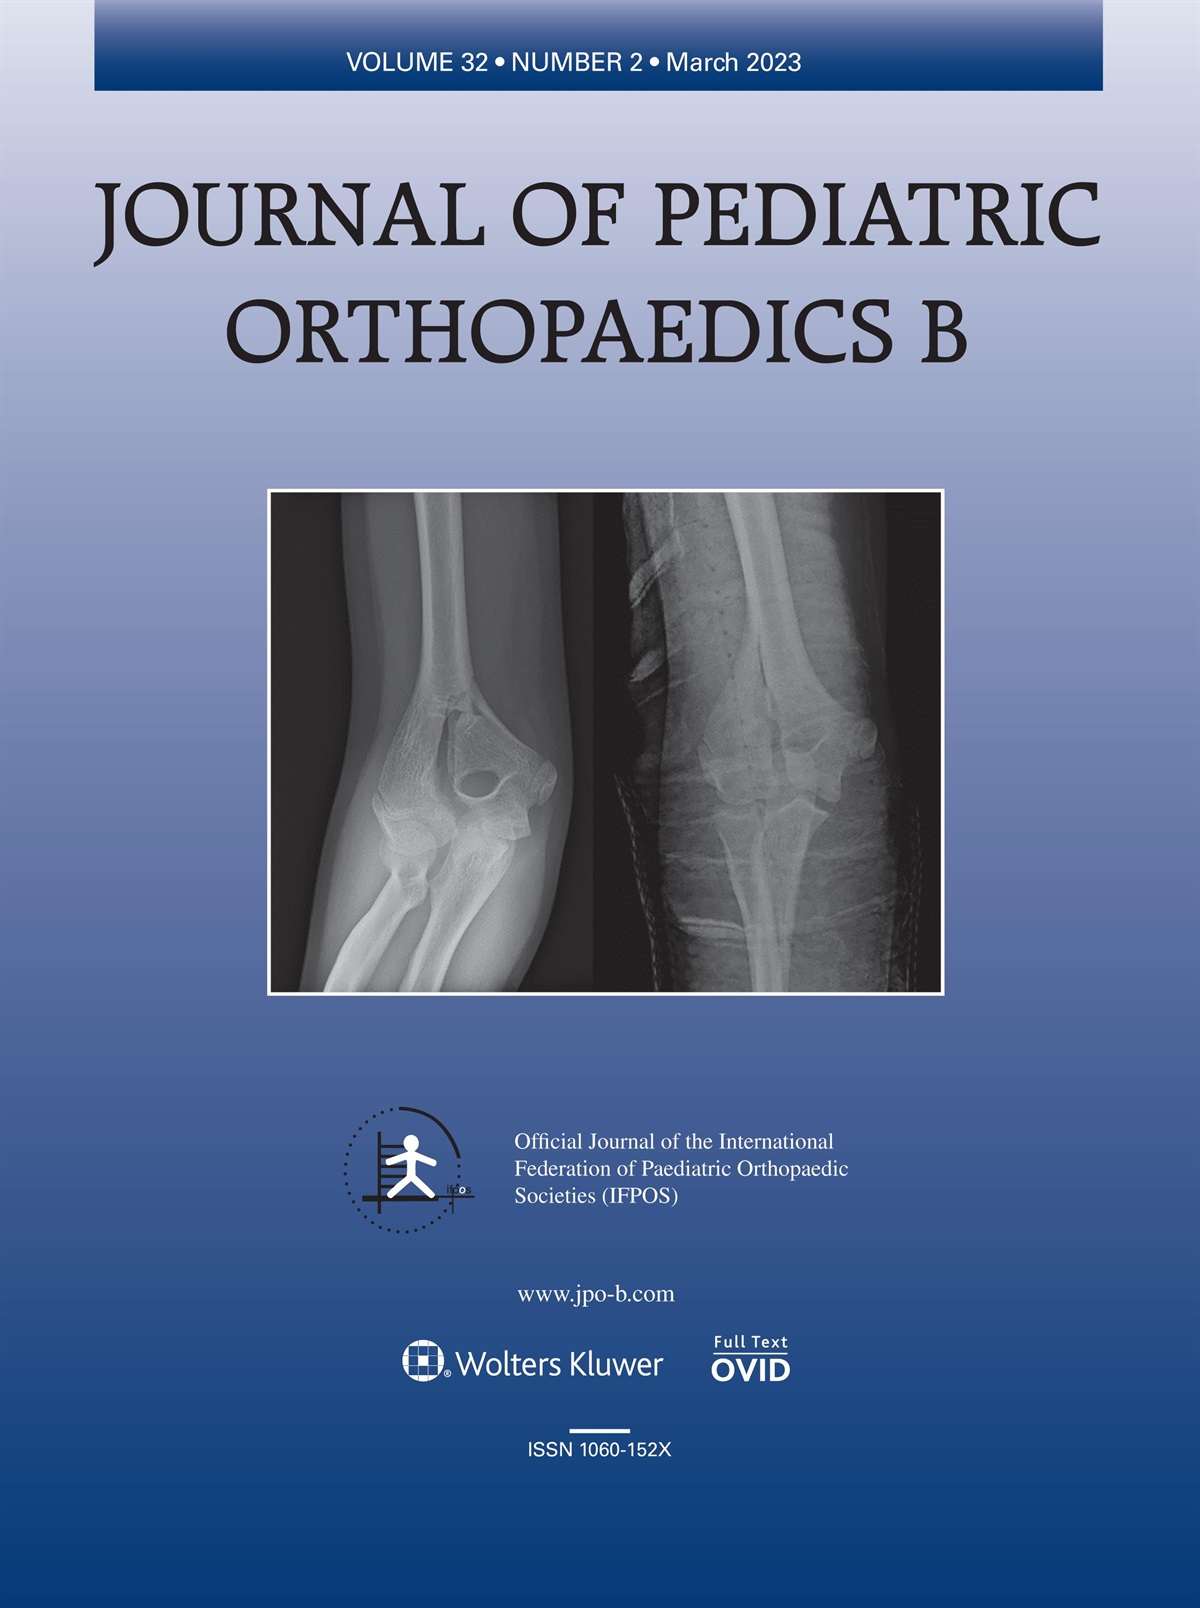 Letter to the editor regarding ‘The trochlear physeal line angle: a novel method to assess coronal plane alignment of the paediatric distal humerus’